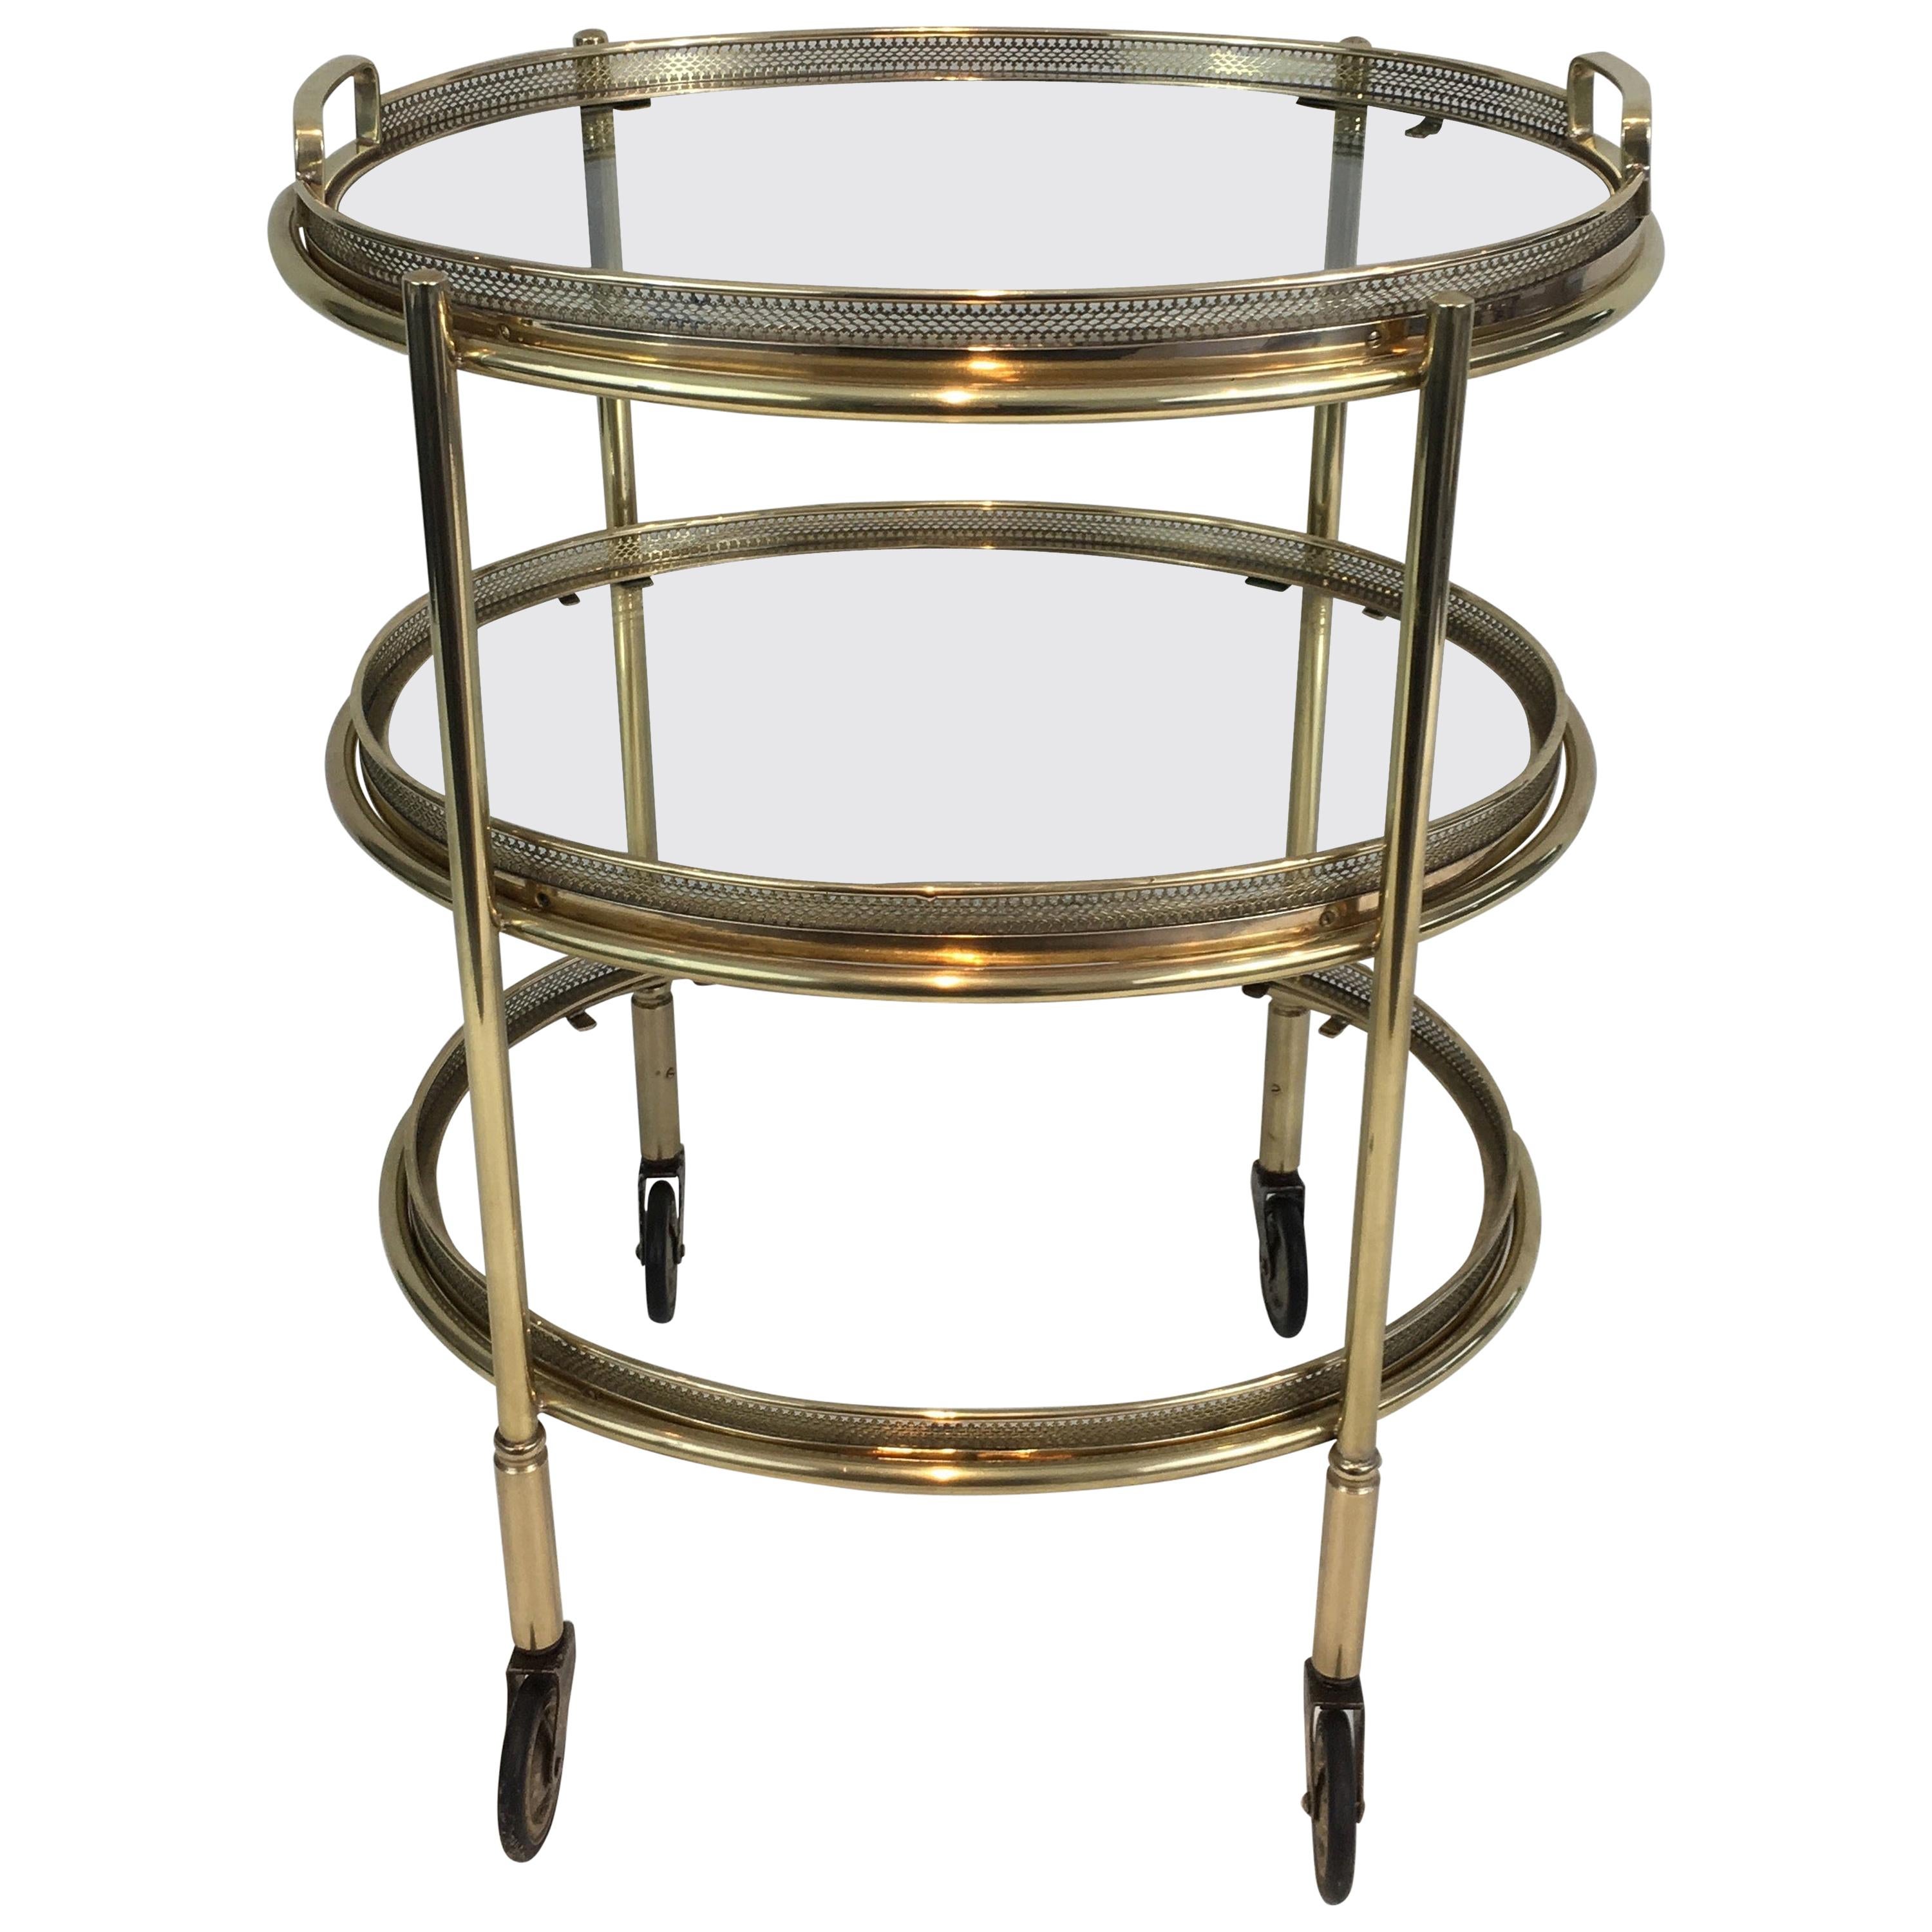 Delicate Neoclassical Oval Brass Trolley with 3 Removable Shelves